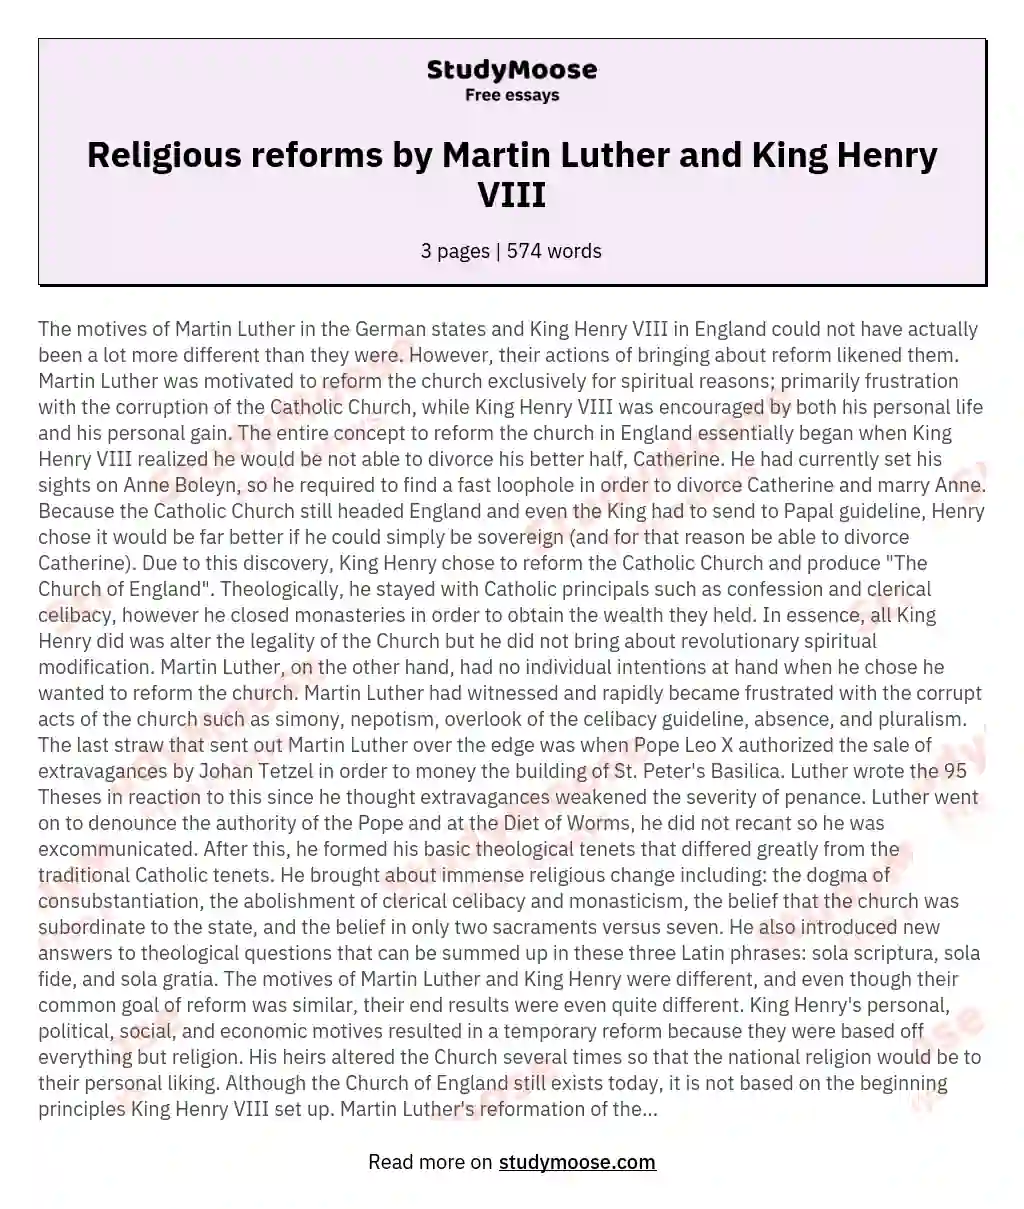 Religious reforms by Martin Luther and King Henry VIII